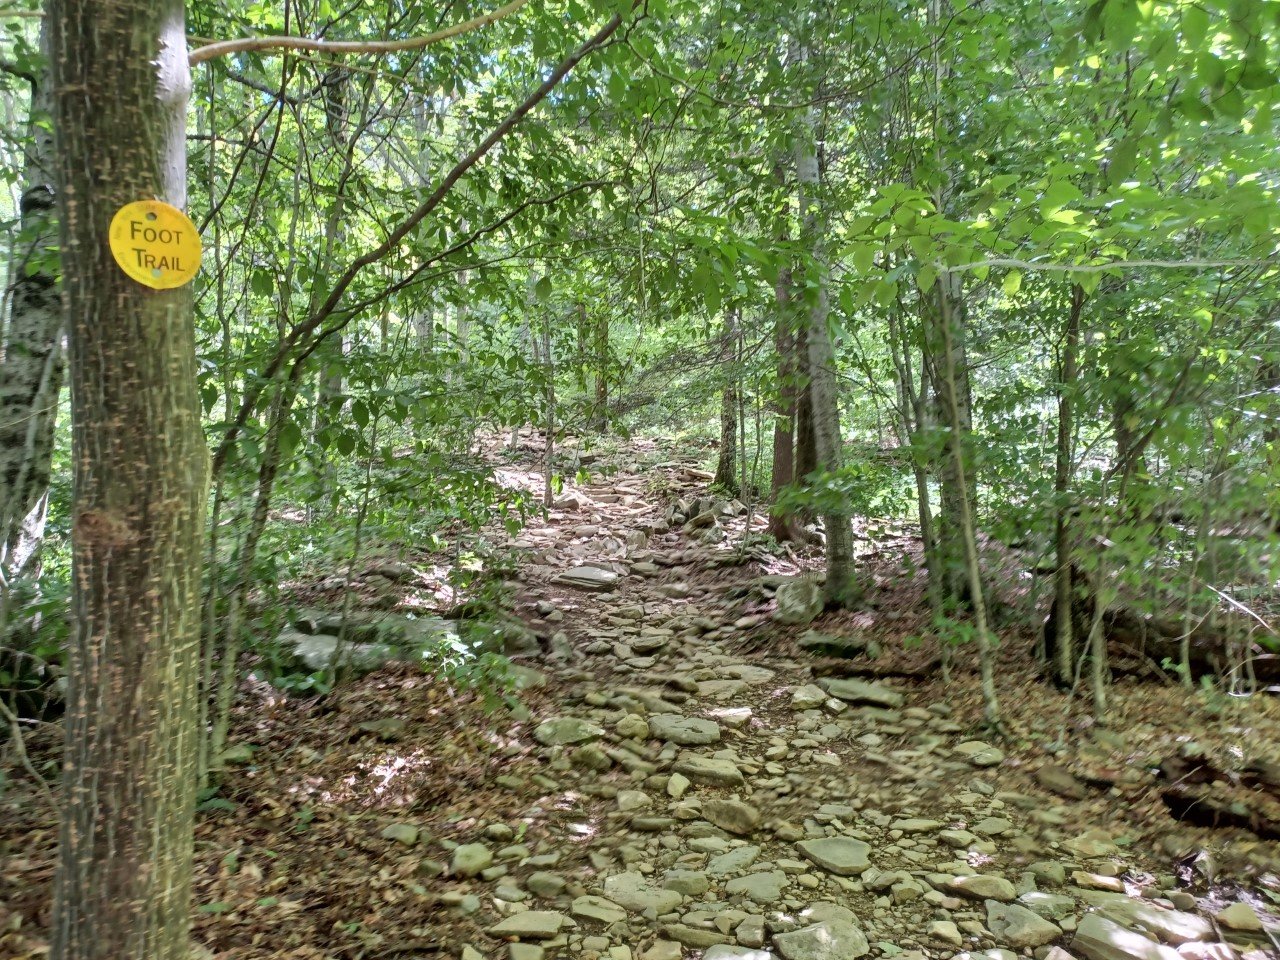 The first part of the Giant Ledge trail is quite flat, though there are still several rocks along the path which can be slippery during and after rainfall.